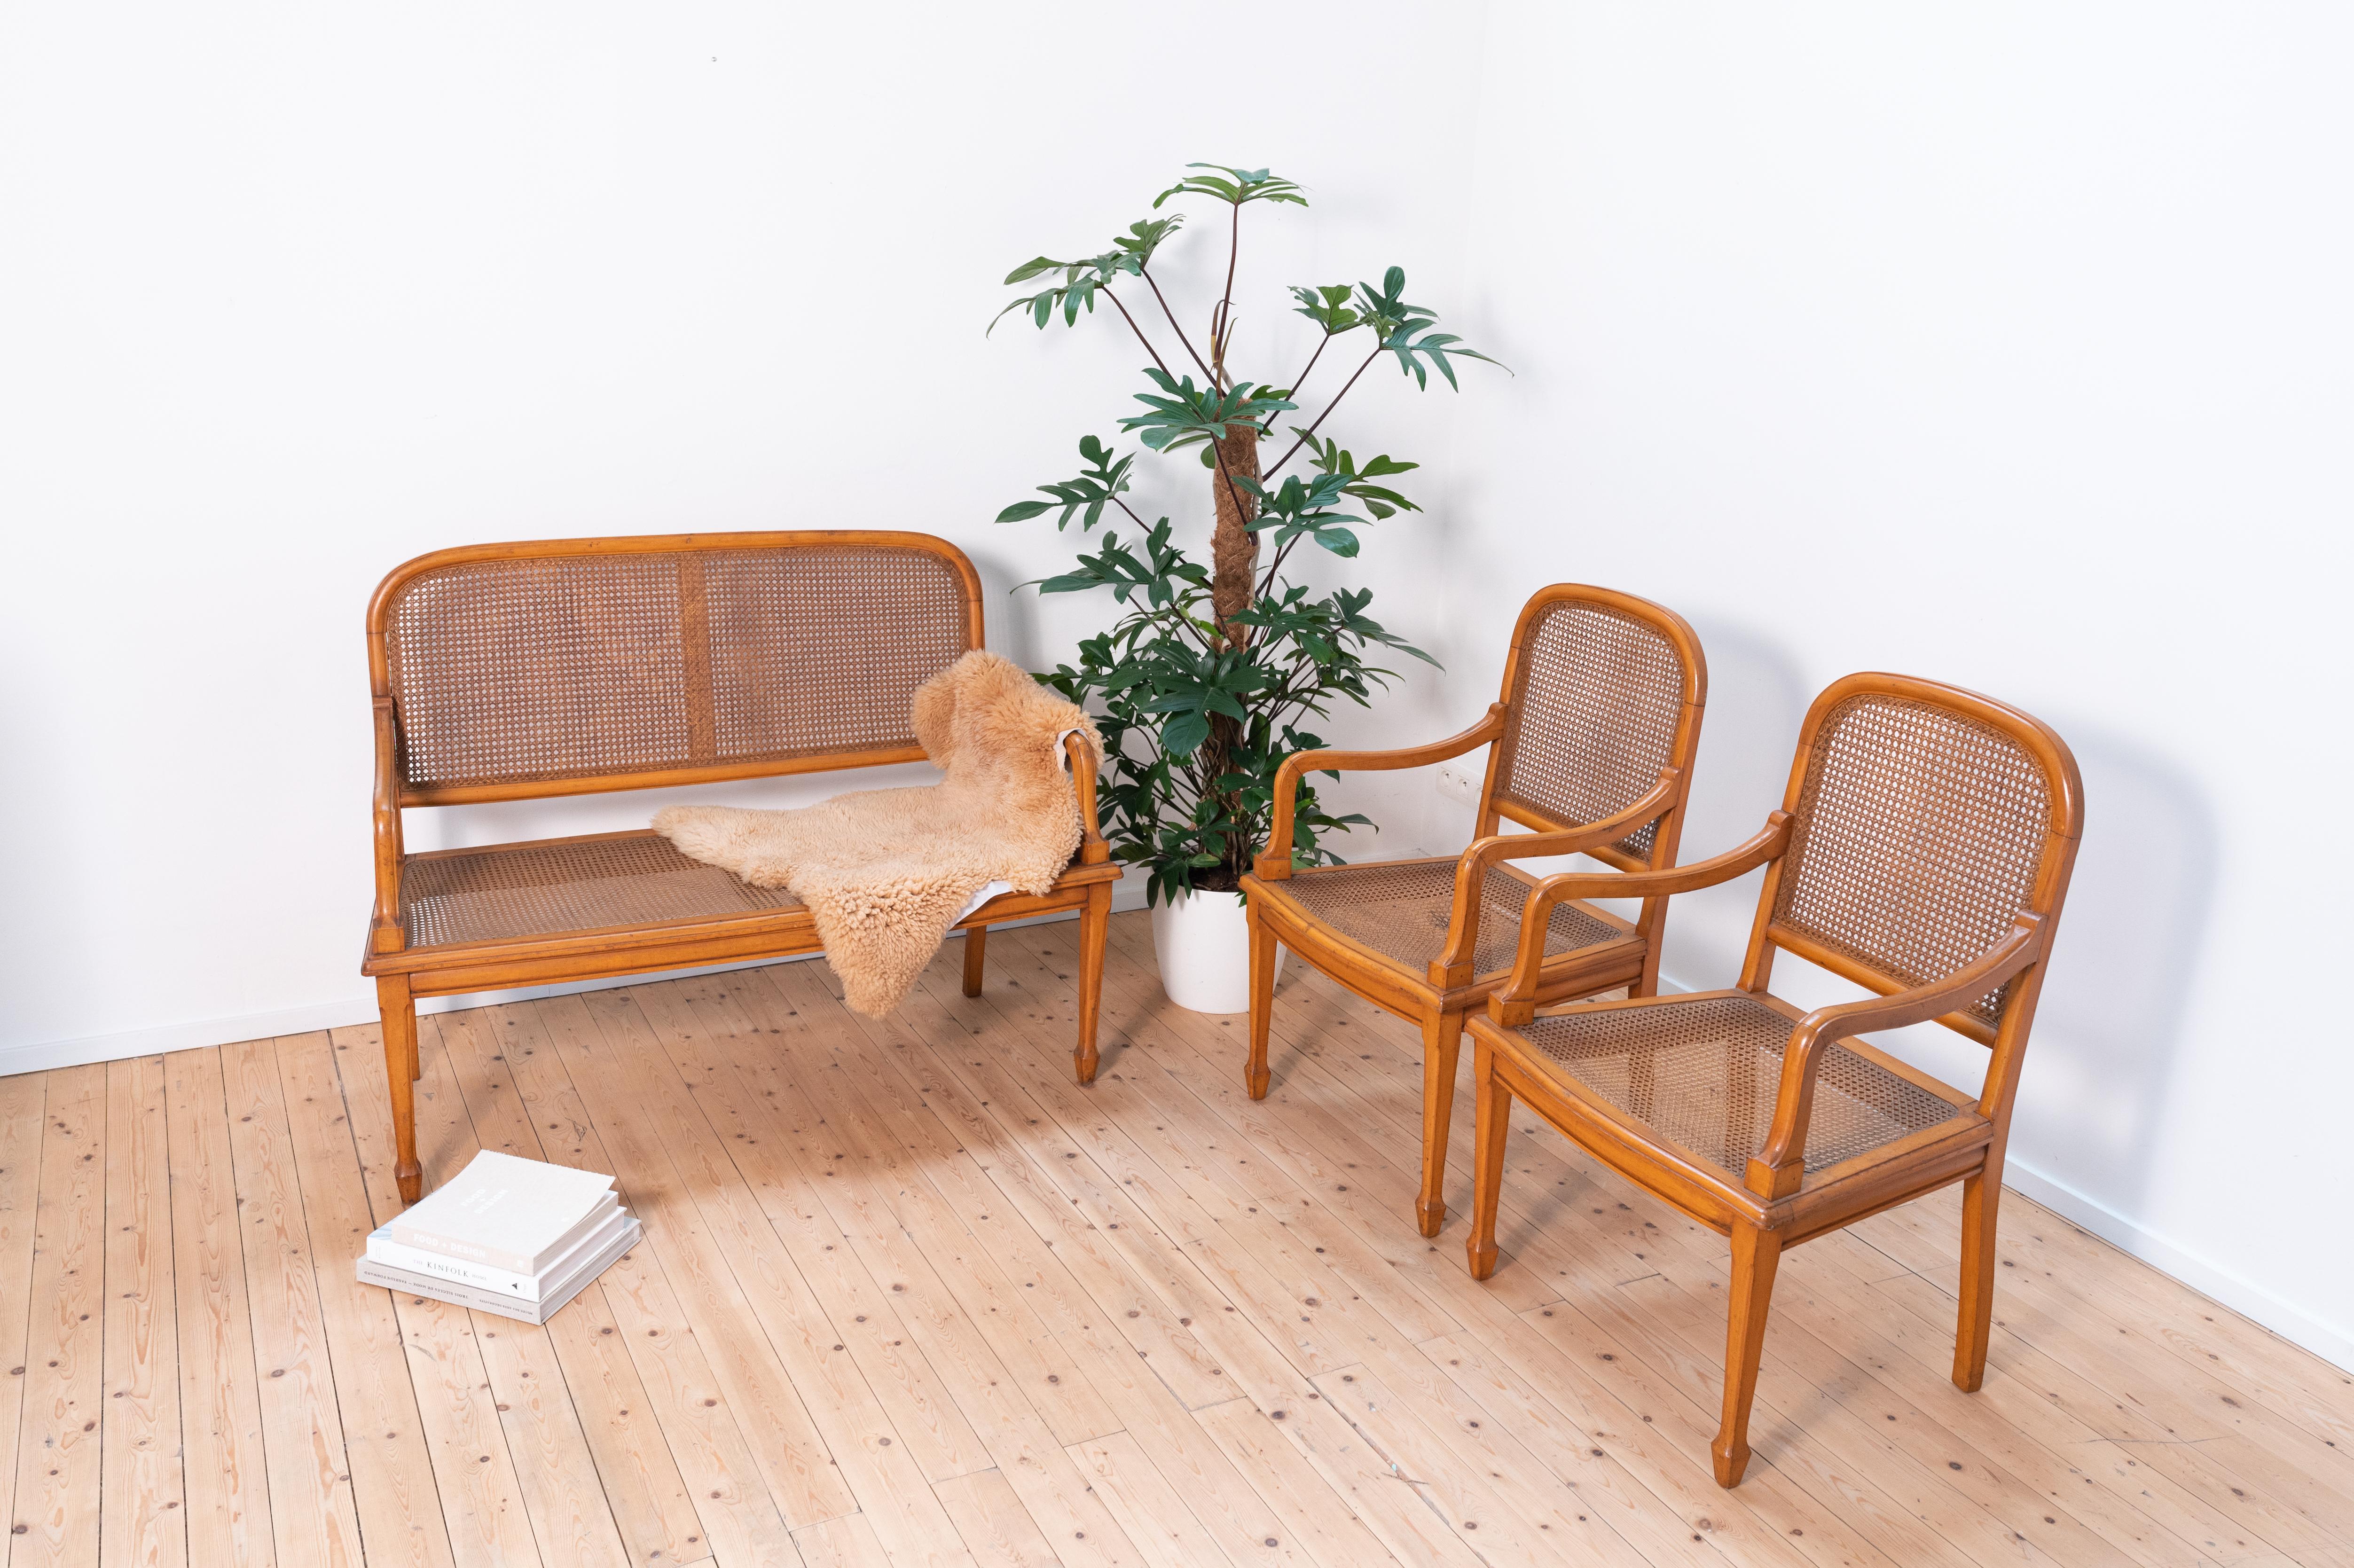 The set consists of 1 sofa and 2 individual chairs. We sell it as a set, not possible to buy chairs separately from sofa or vice versa. One of the rattan seatings was originally damaged, but this has been skilfully repaired and now looks like new.